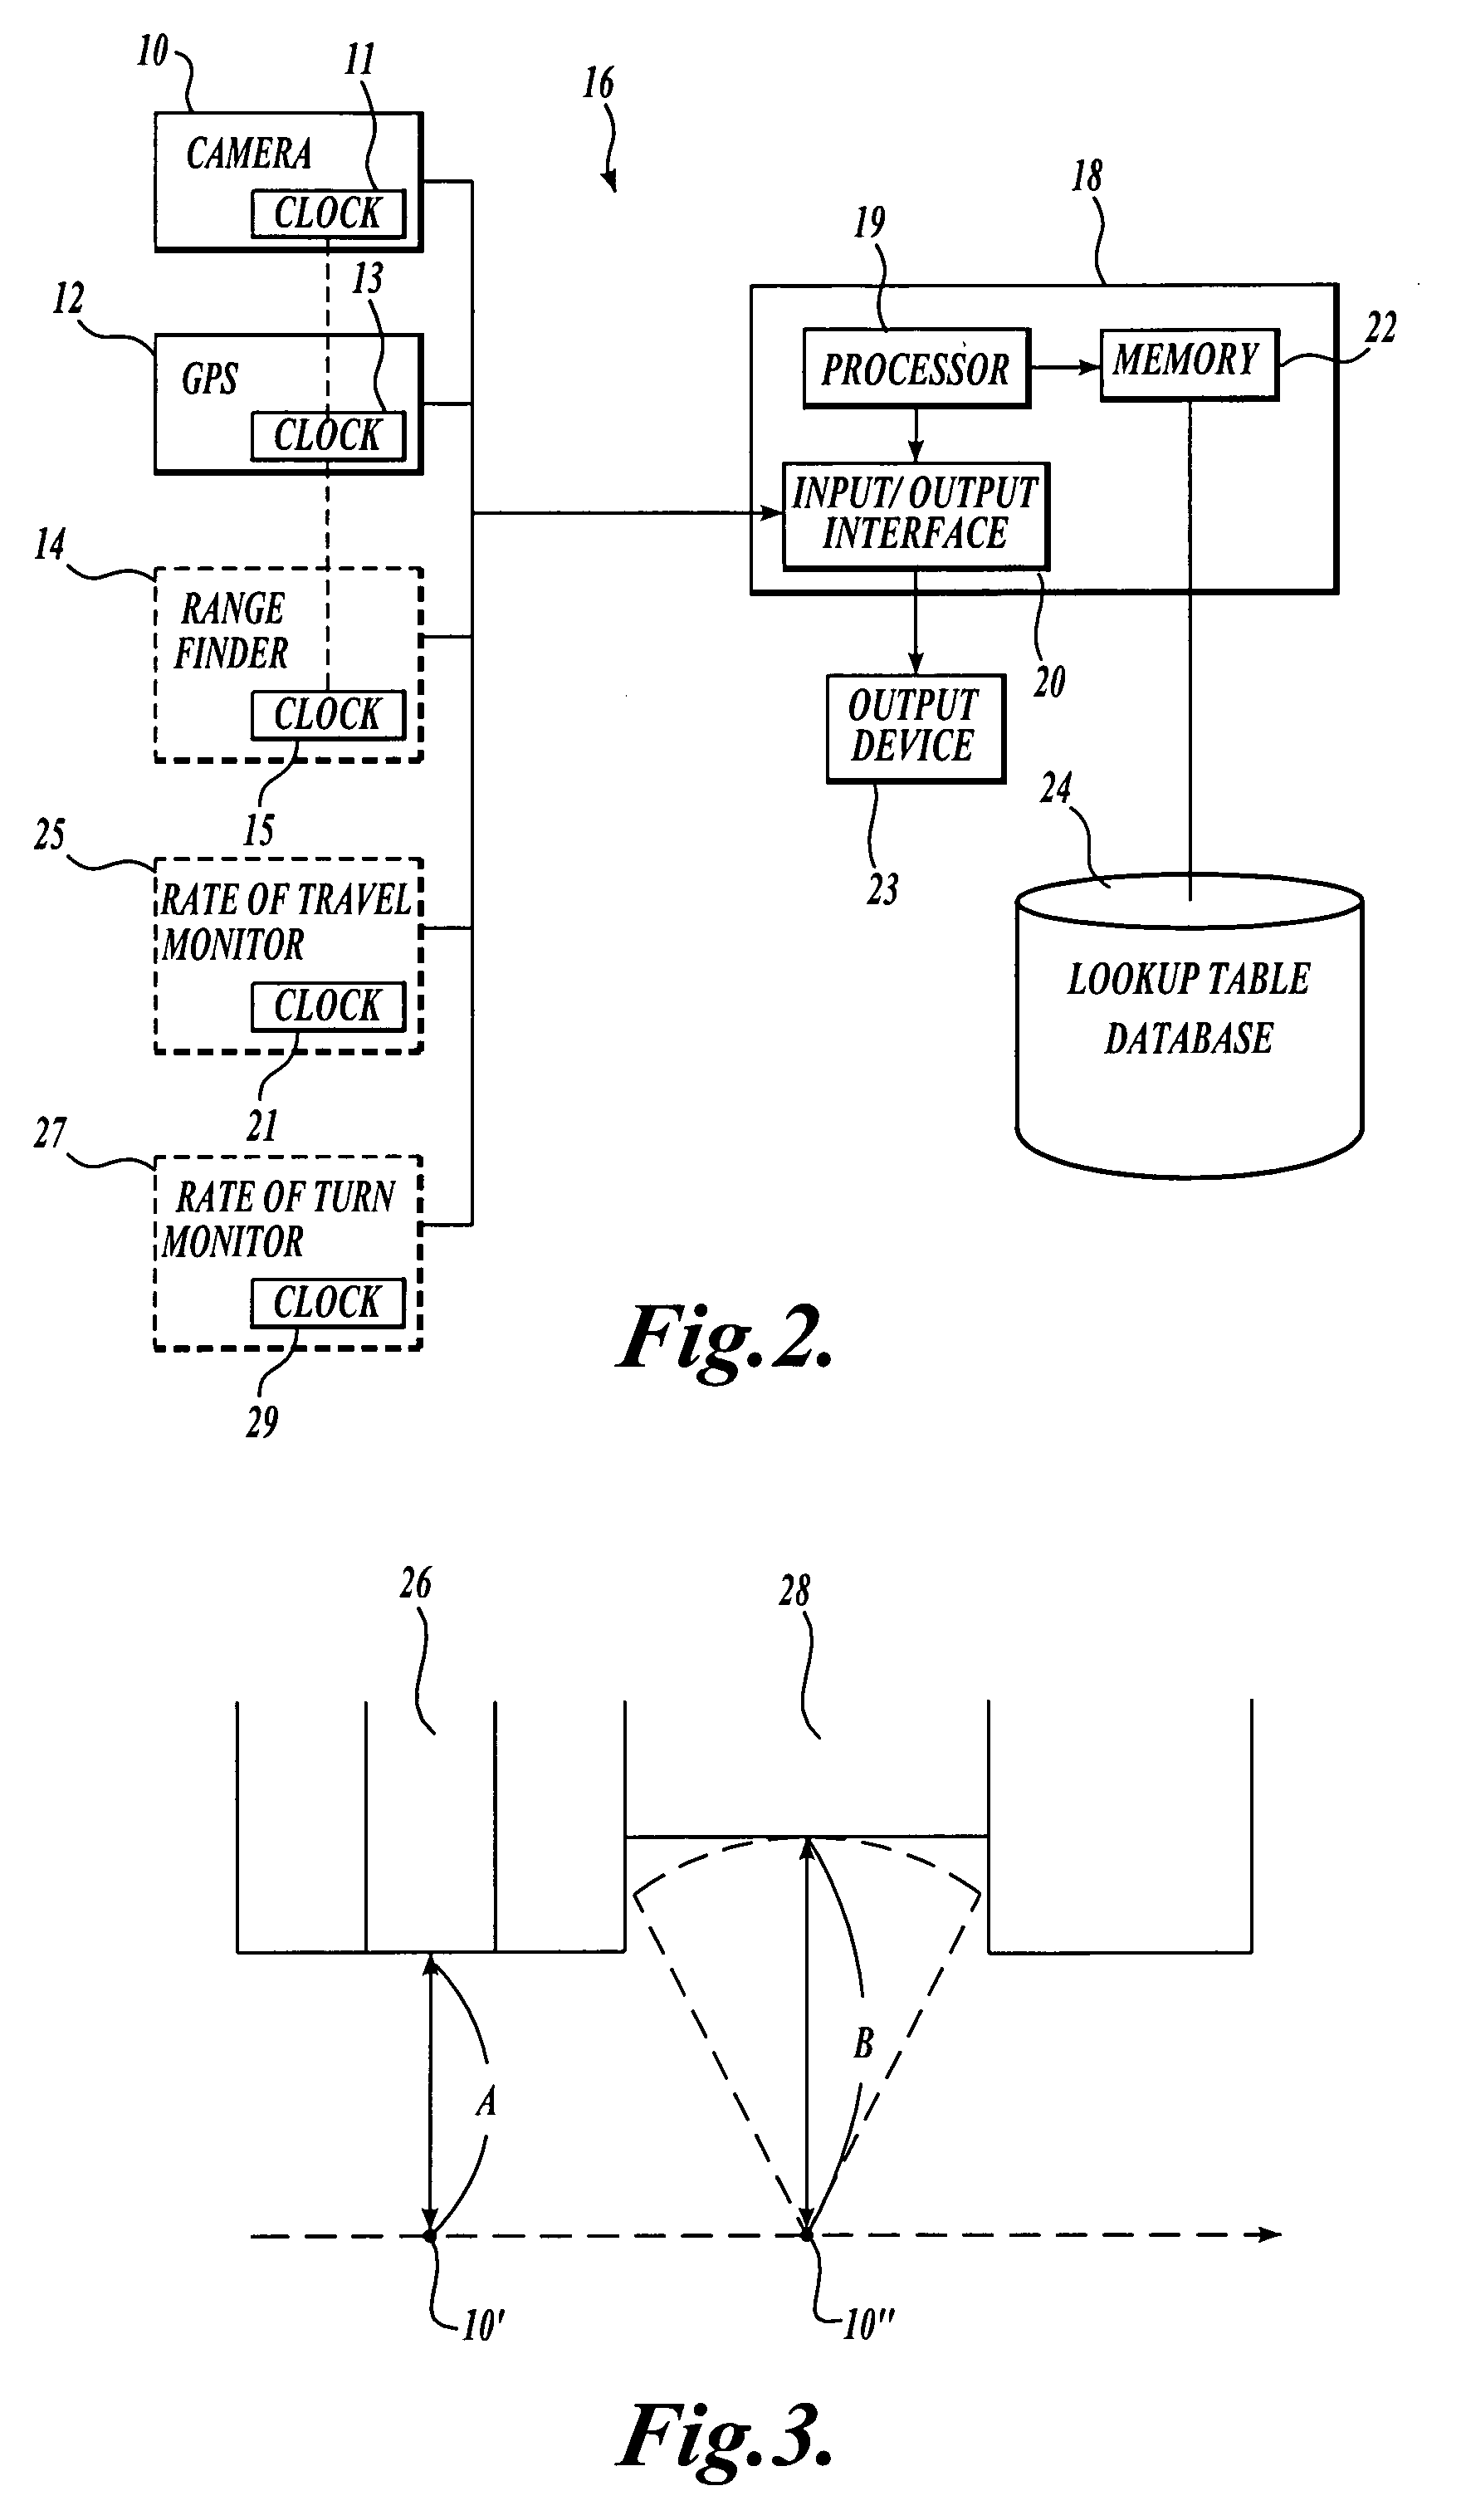 System and method for displaying images in an online directory